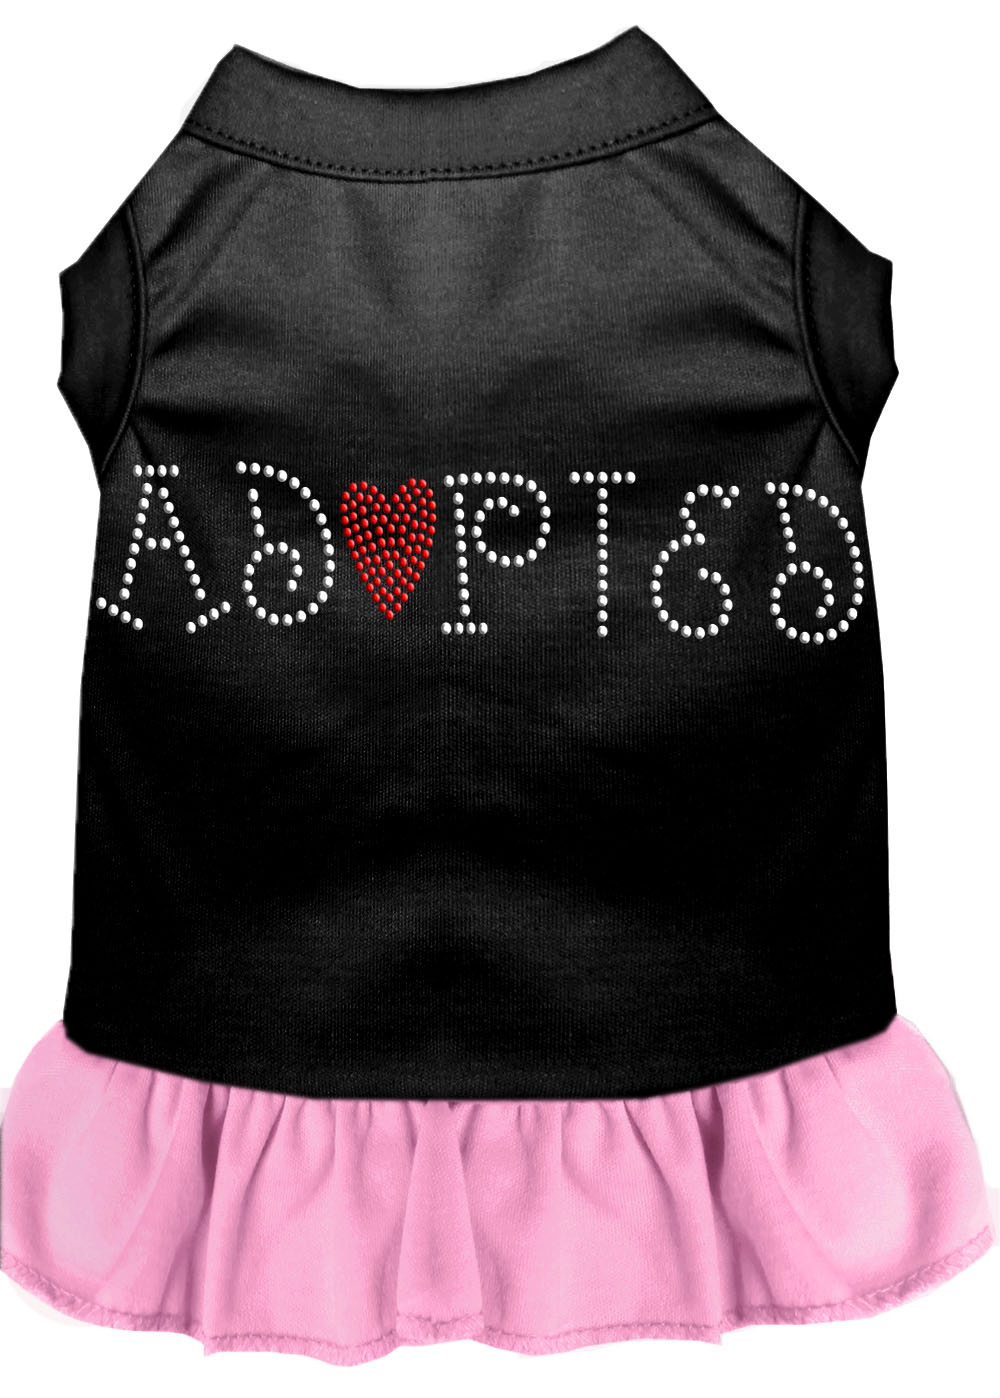 Adopted Rhinestone Dresses Black with Light Pink XS